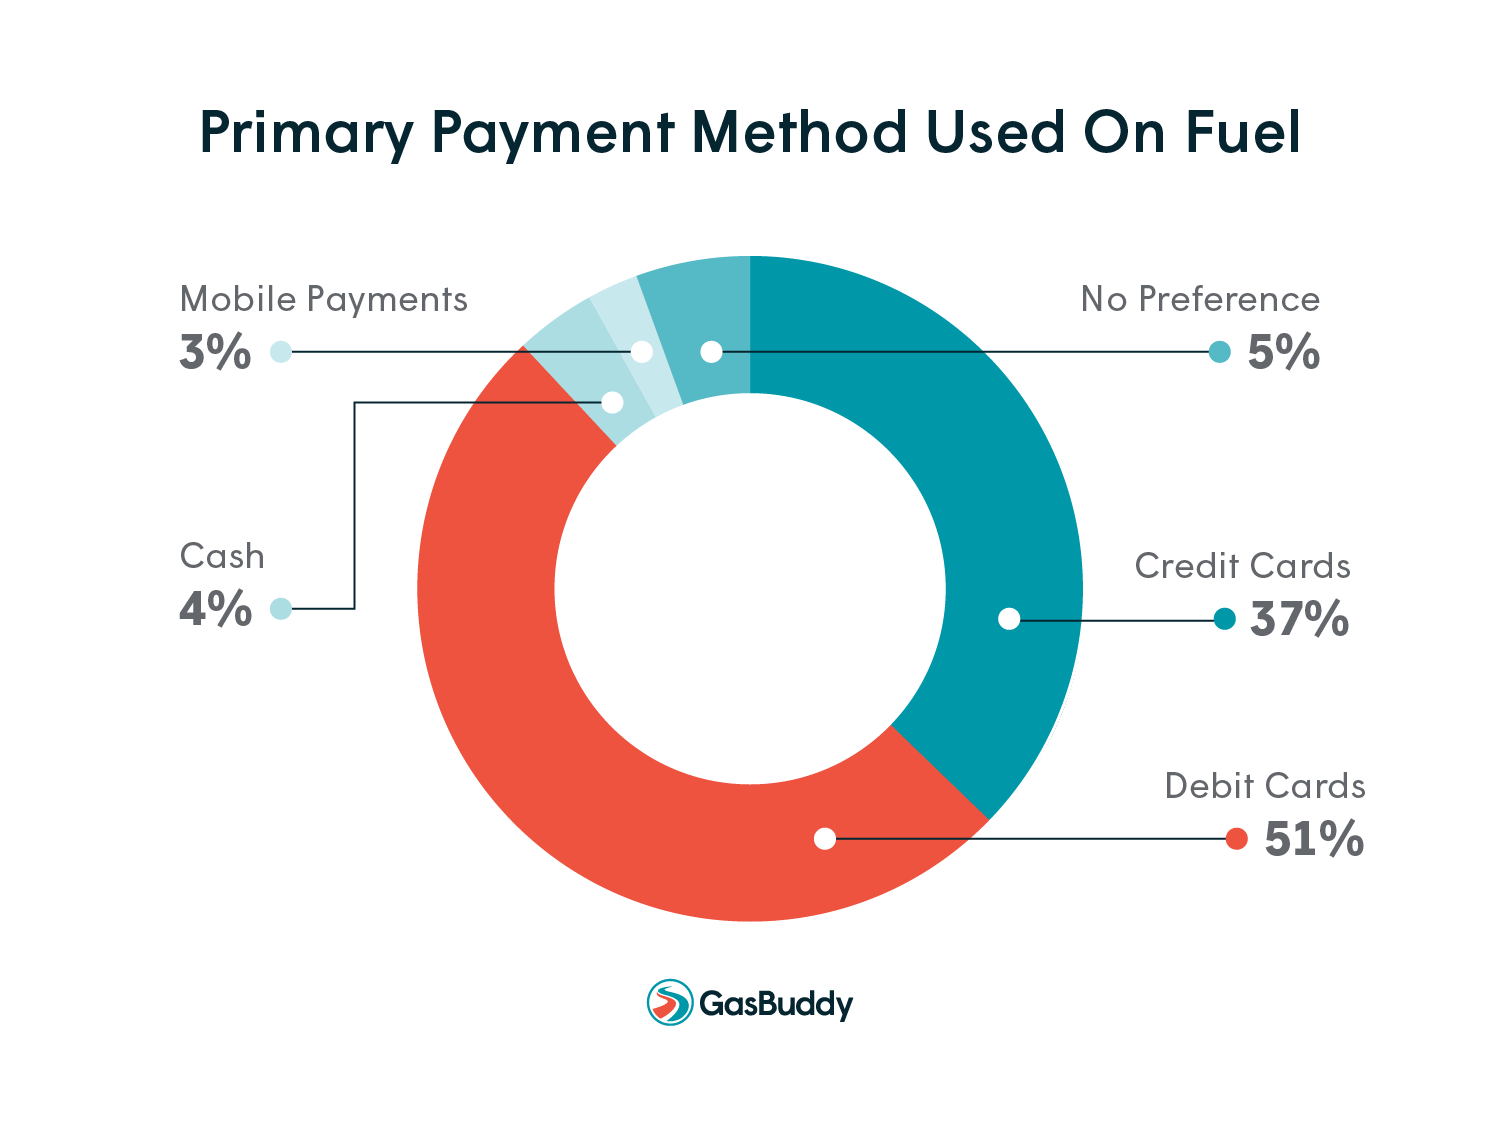 Primary Payment Method for Fuel Purchases Pie Chart - GasBuddy Payments Sur...